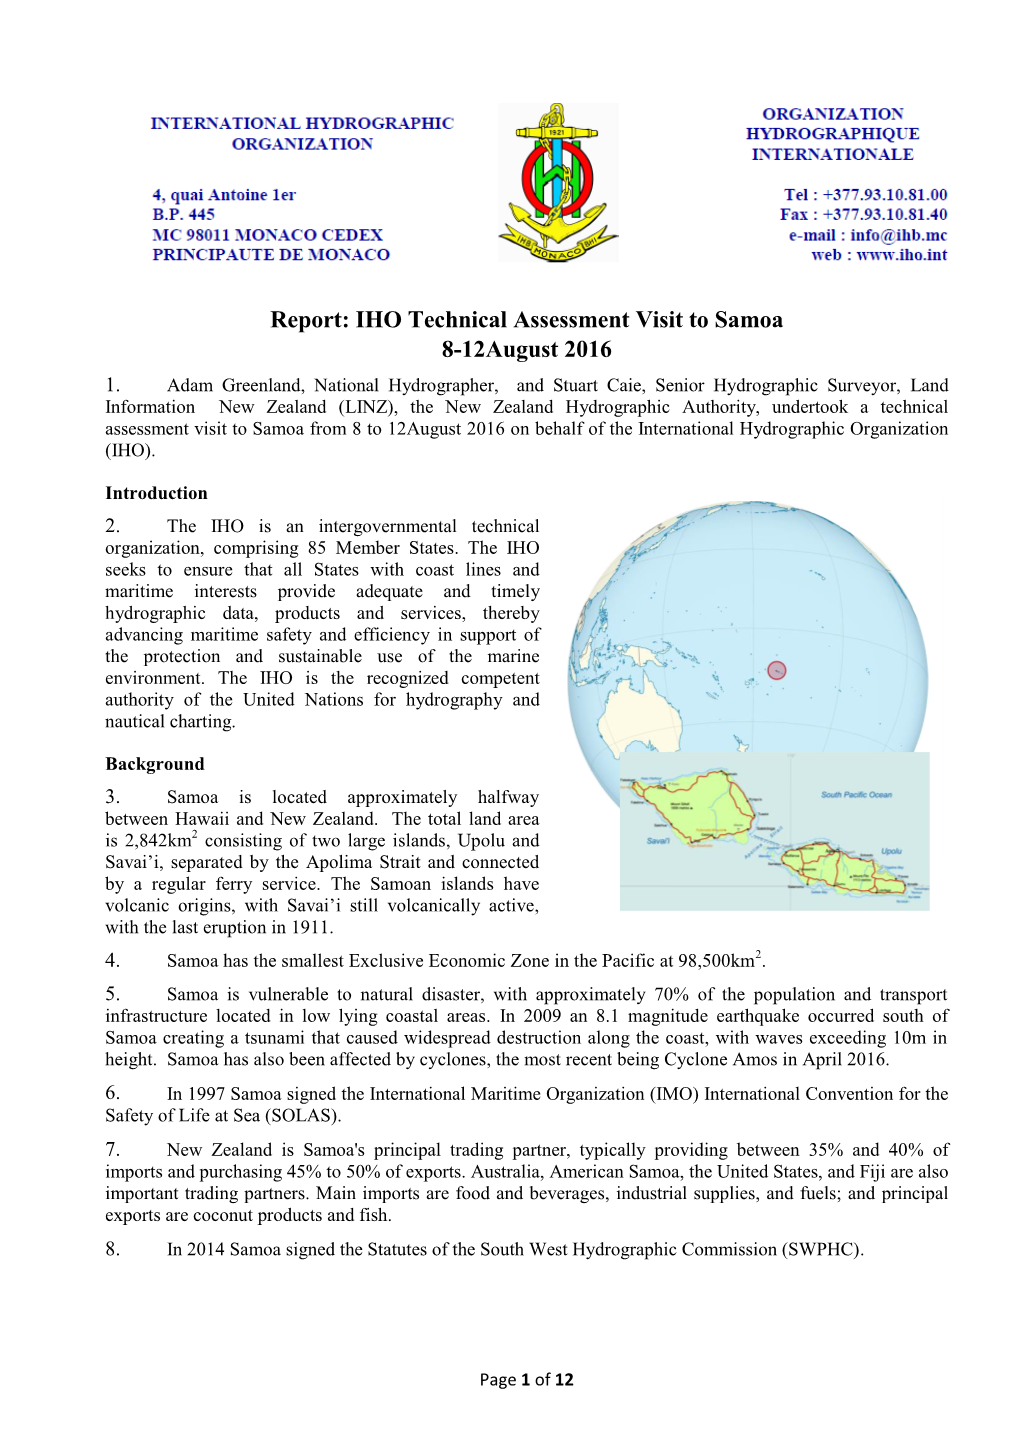 FINAL Report of IHO Technical Visit to the Cook Islands Feb 2011